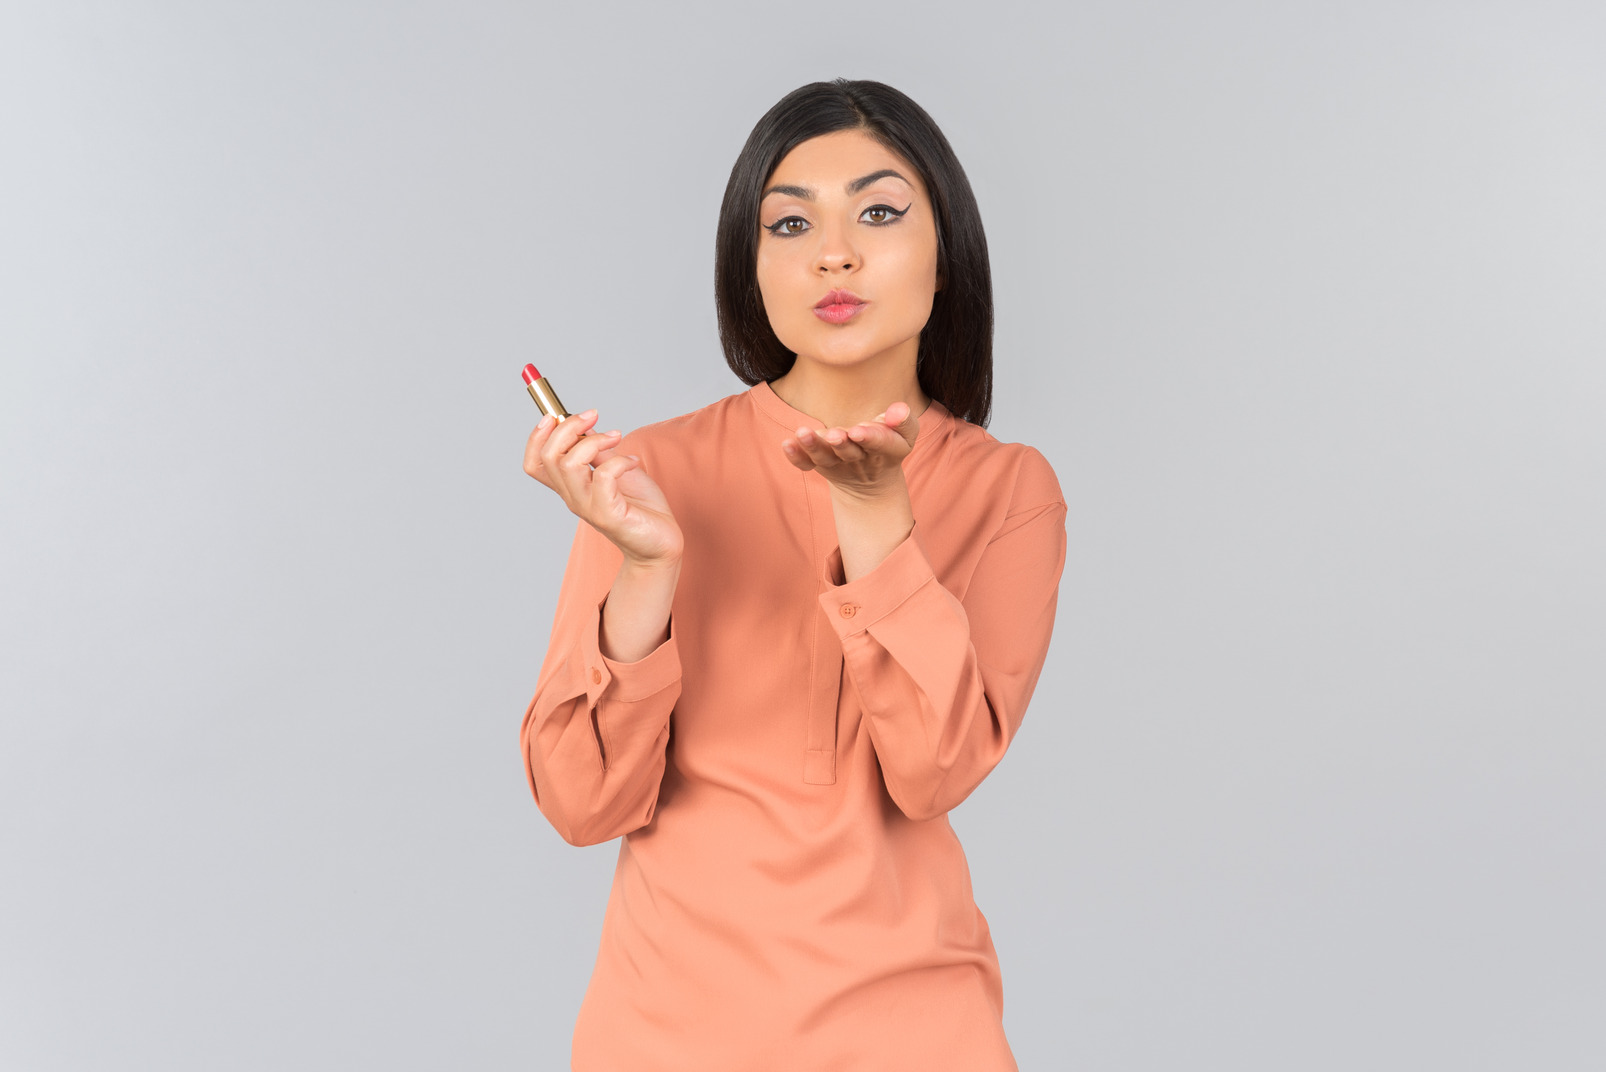 Indian woman in orange top holding lip balm and sending air kiss